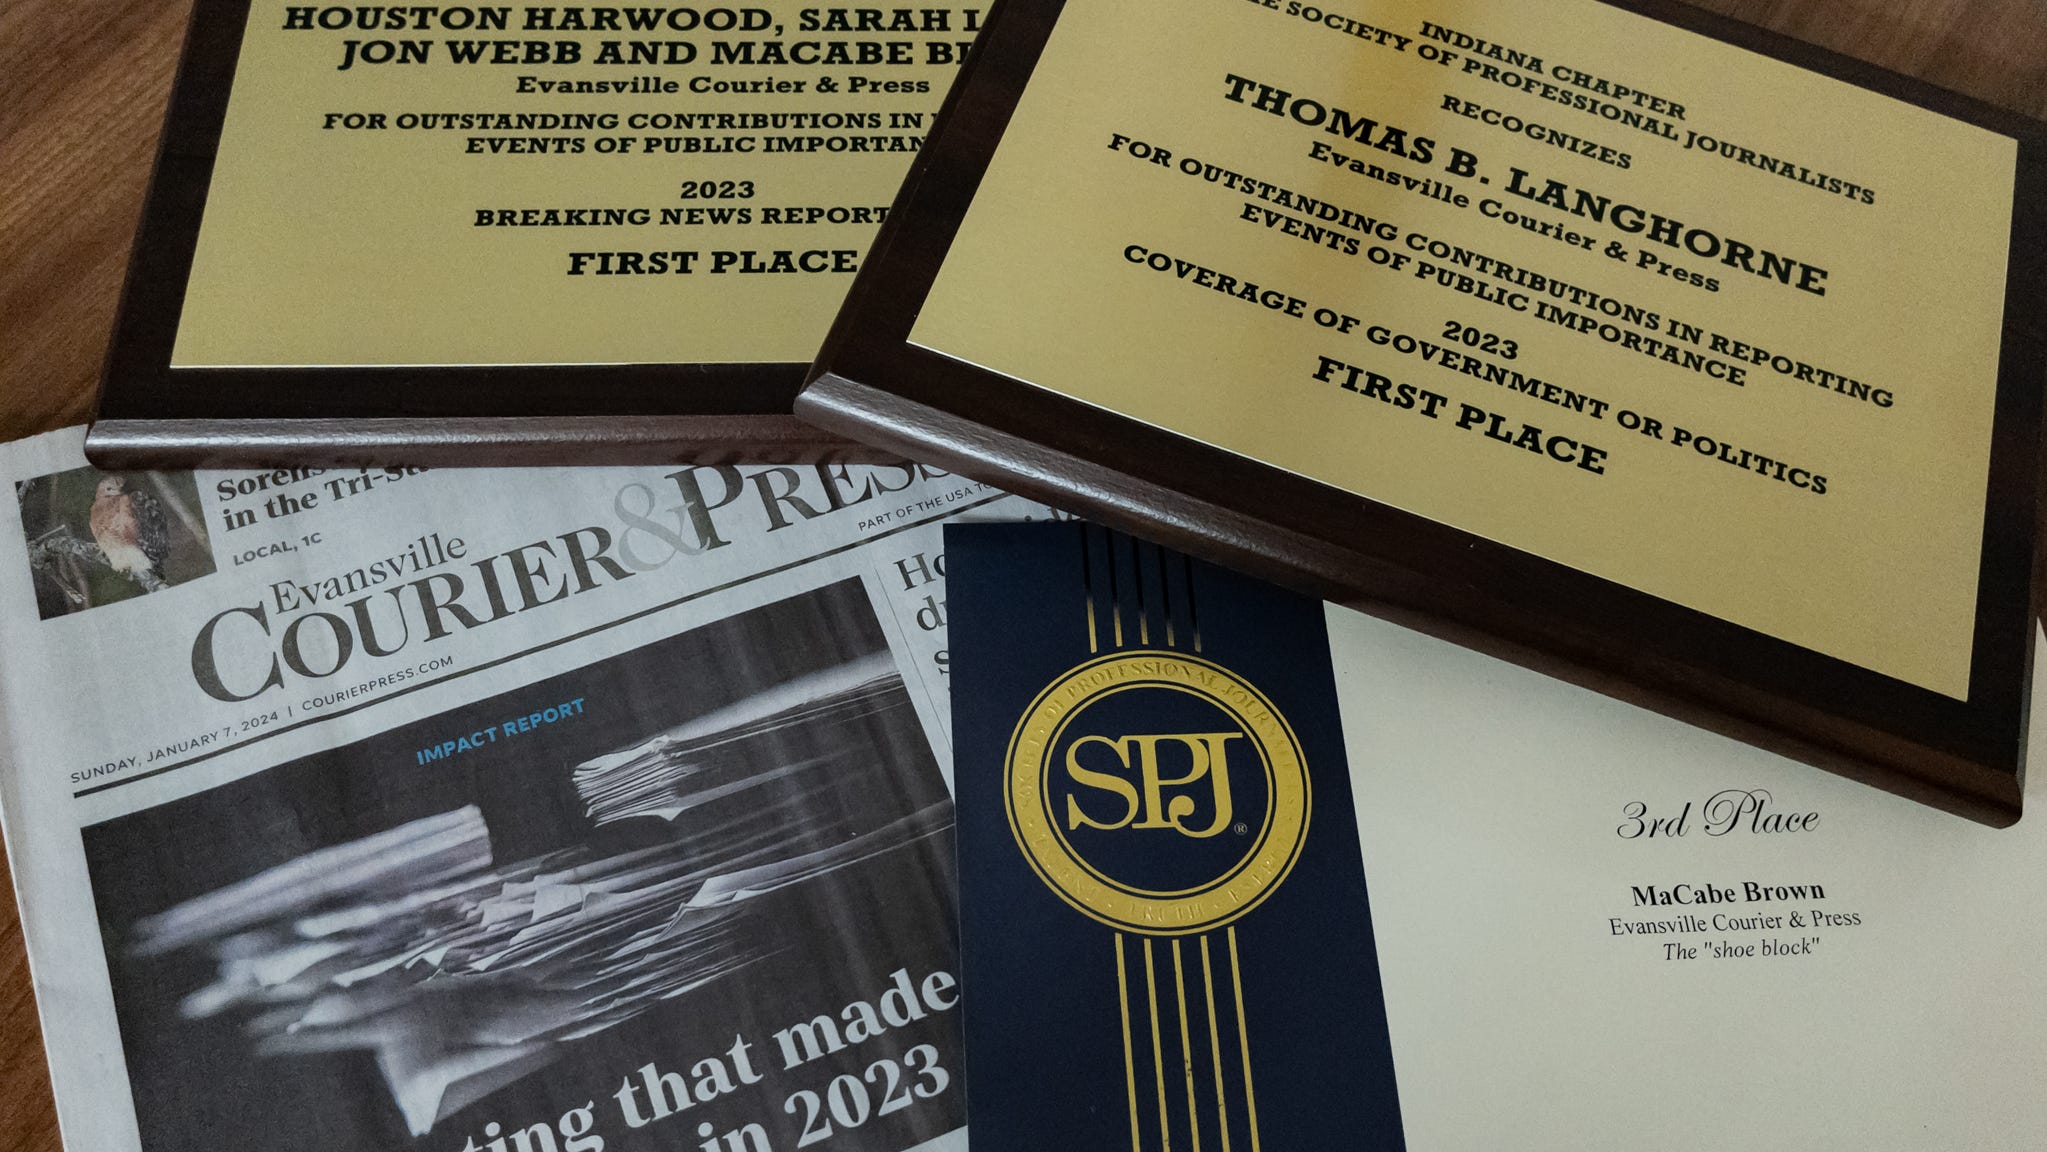 Courier & Press well represented at Society of Professional Journalists annual awards